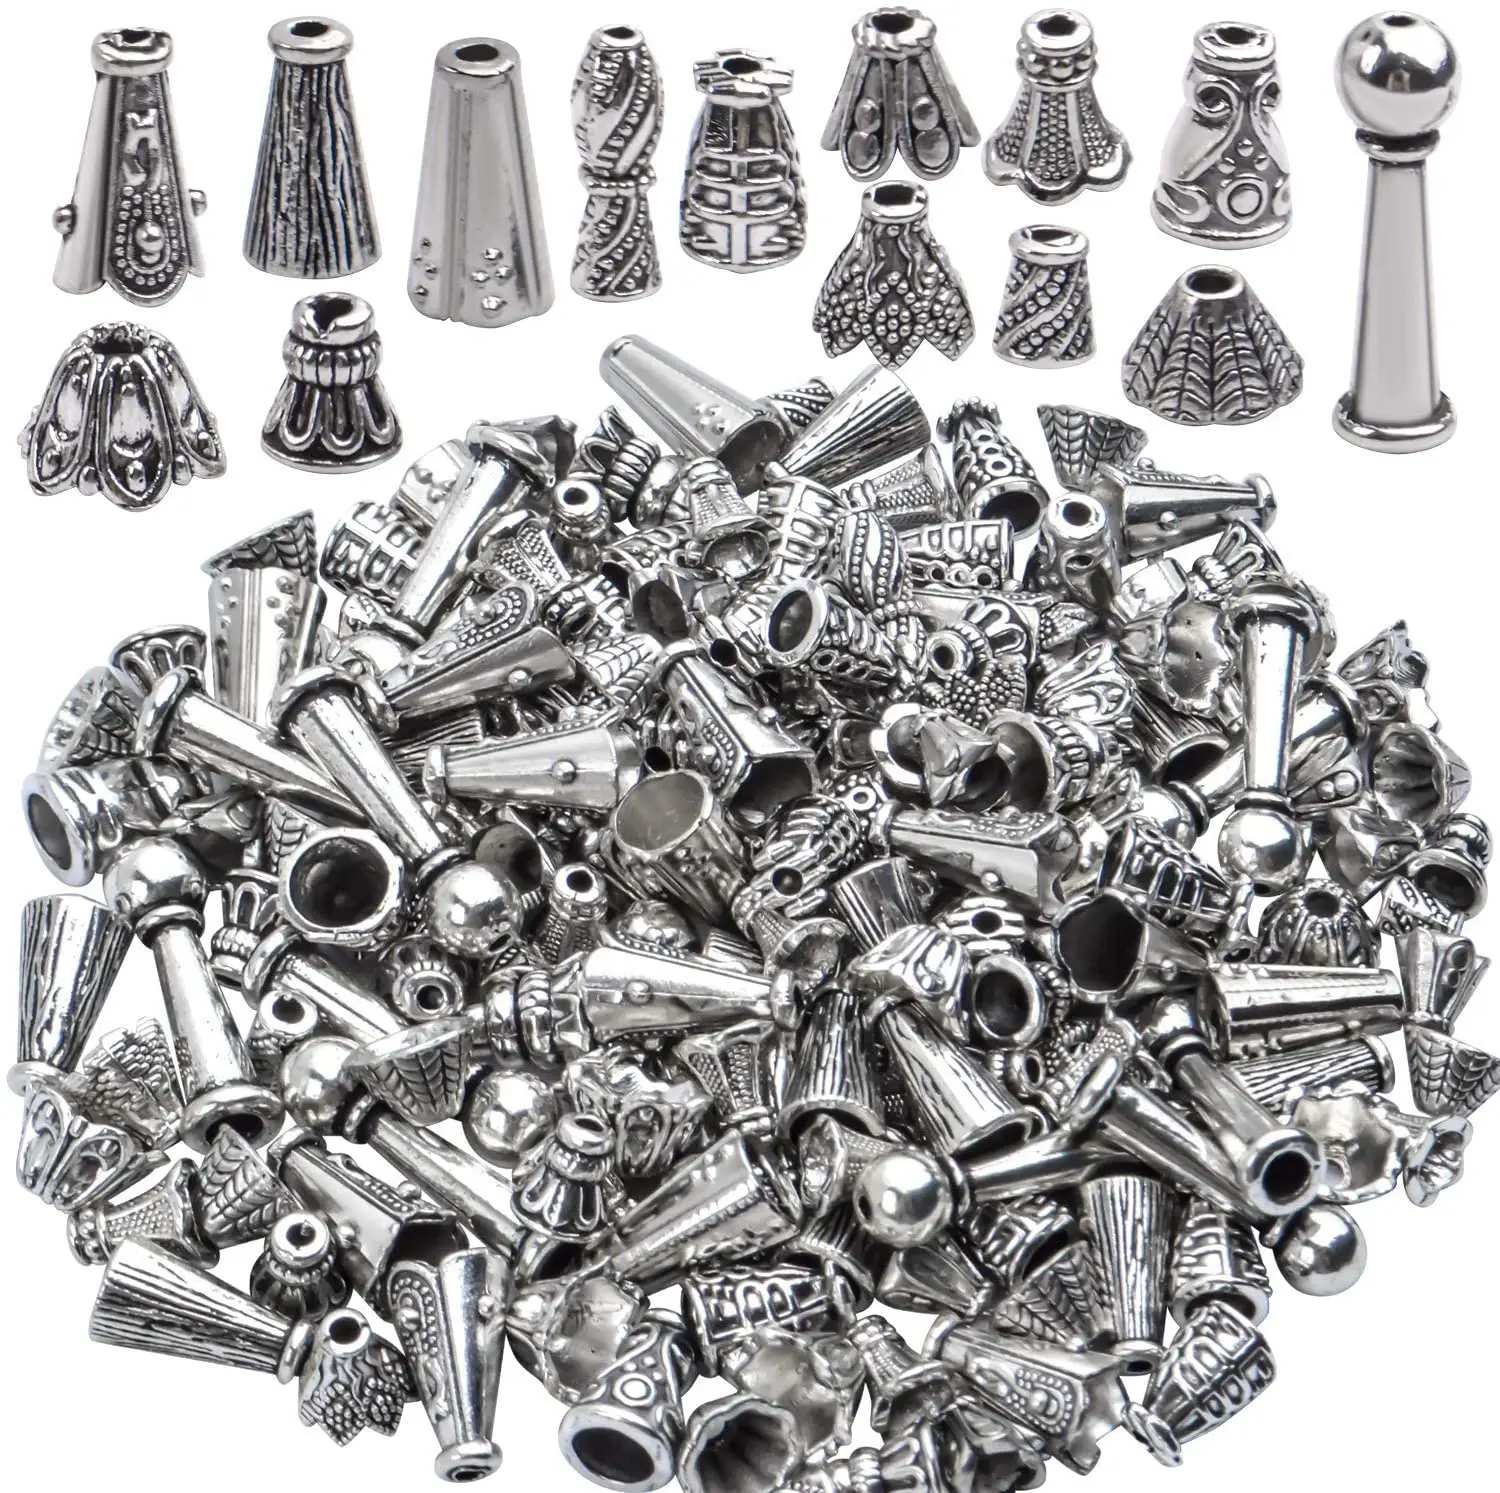 100 Gram(About 130-190pcs)Mixed Antique Silver Cone Bead Caps Flower Spacer Beads Tassel End Cap for DIY Jewelry Making Supplies